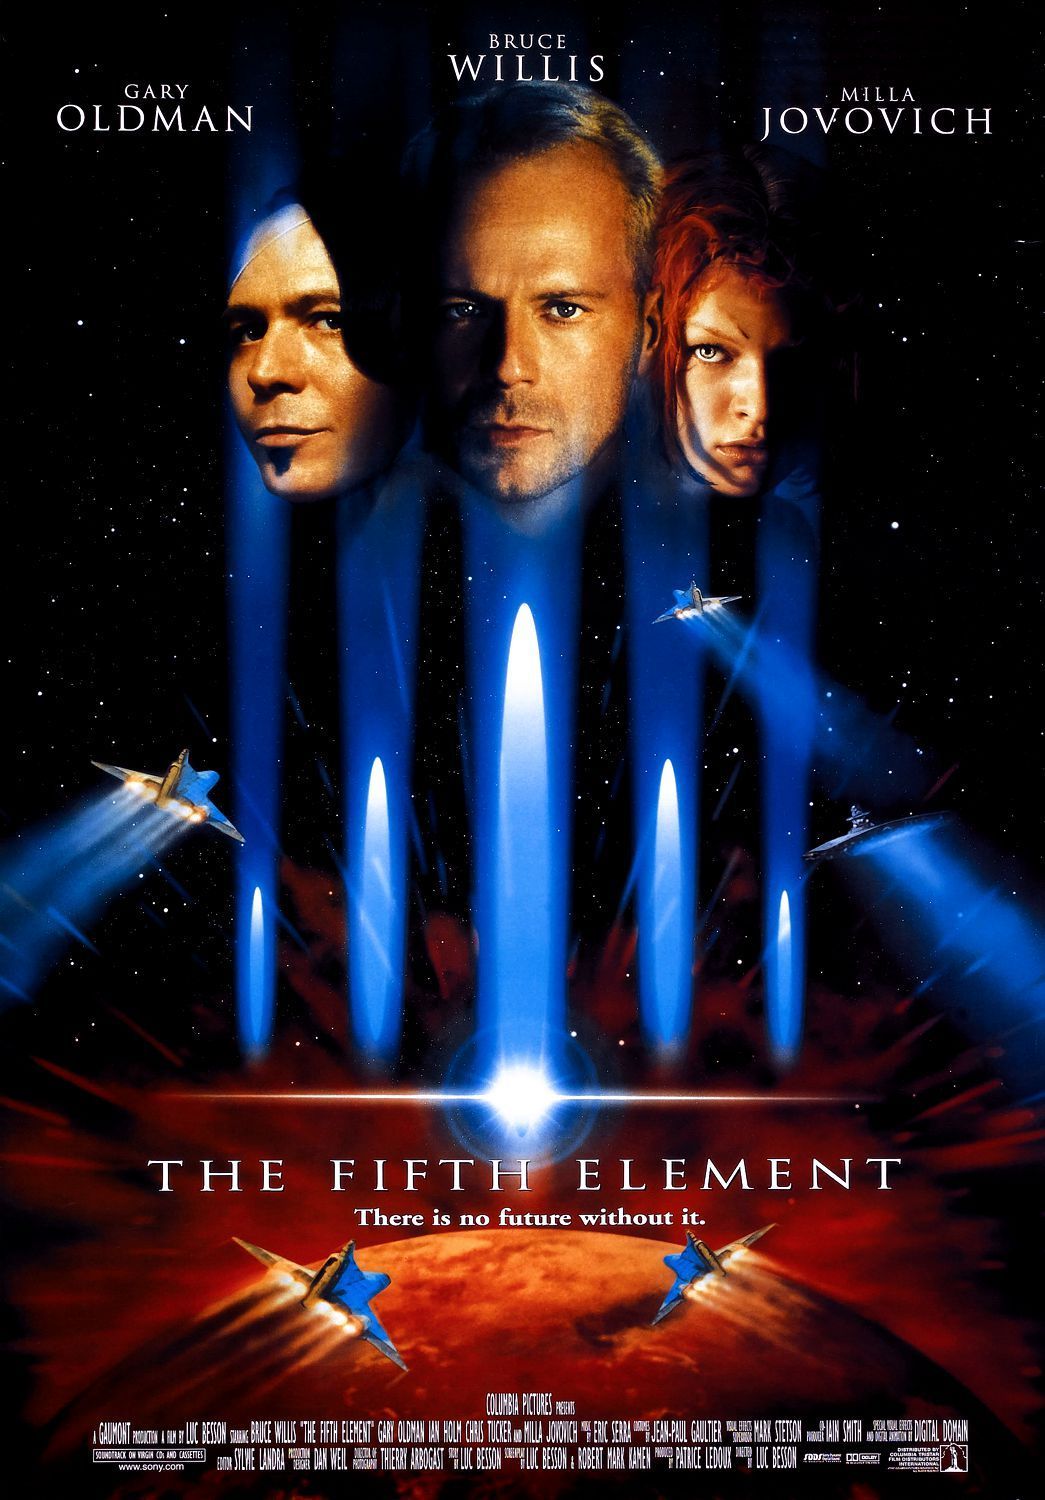 the-fifth-element-movie-poster.jpg